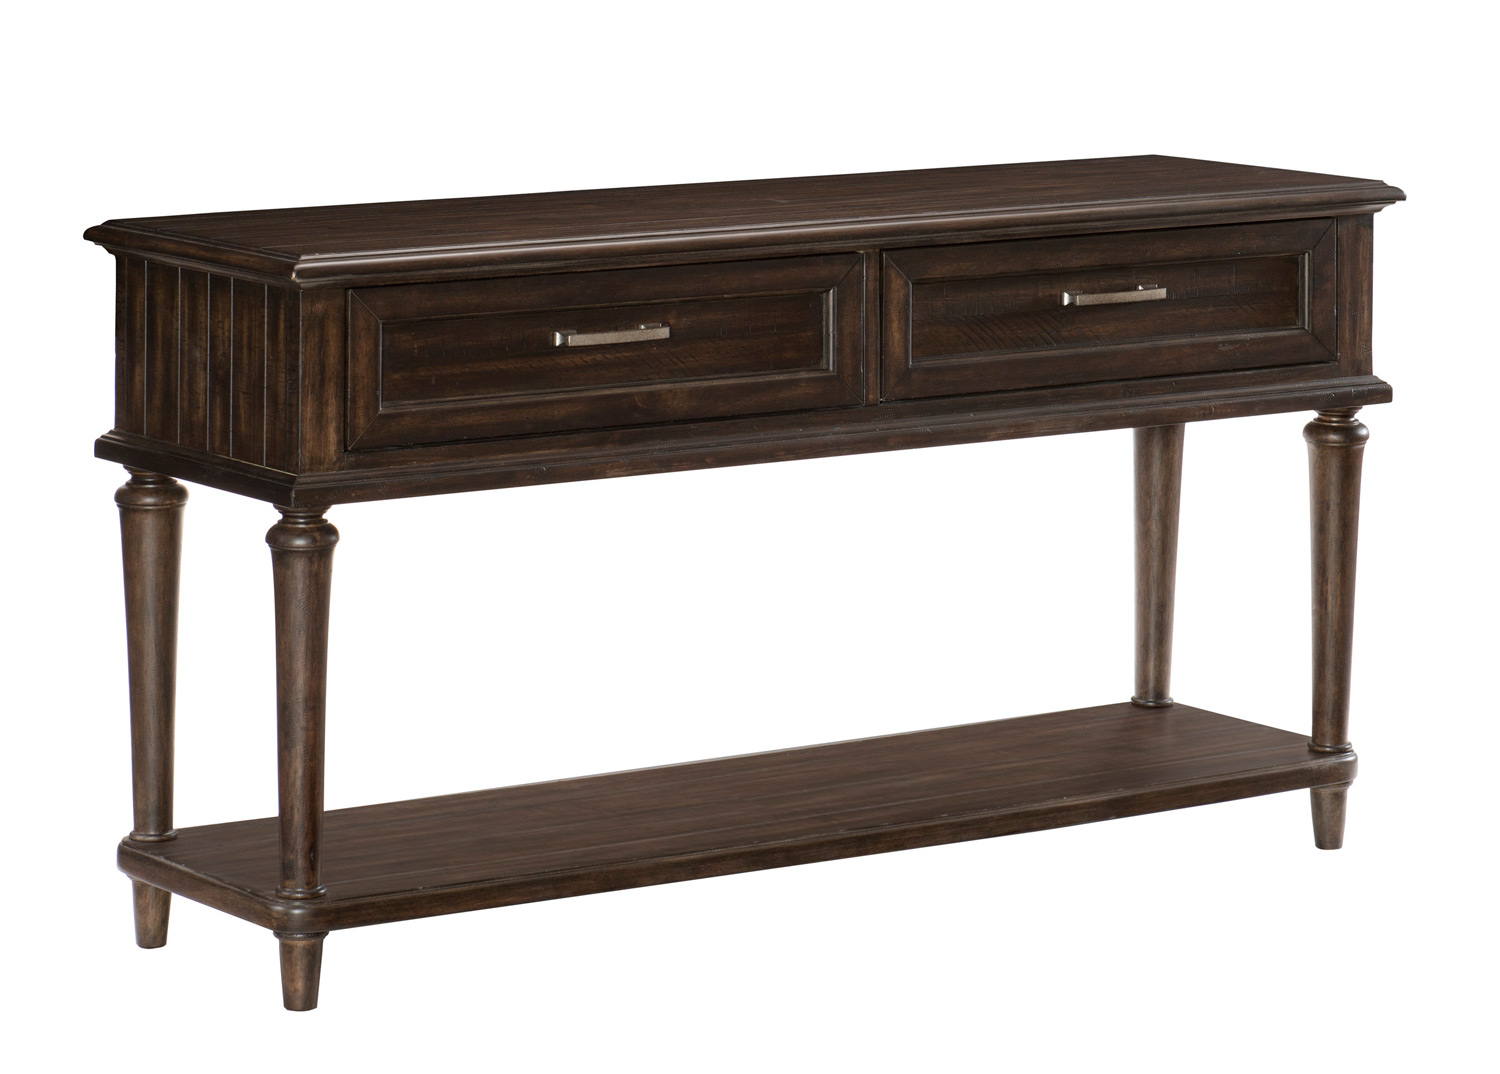 Homelegance Cardano Sofa Table with Two Functional Drawers - Driftwood Charcoal